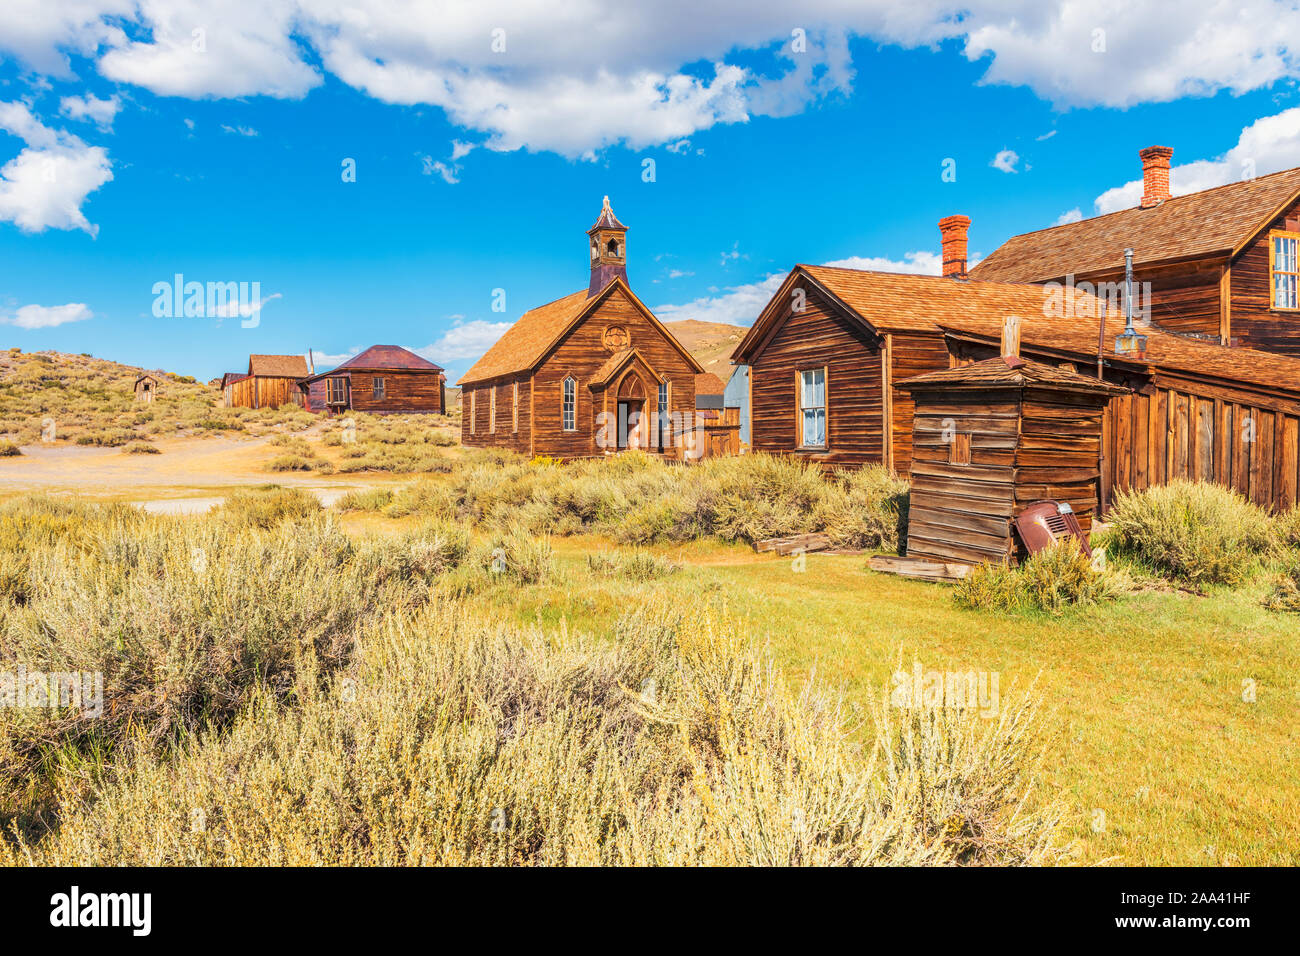 Wooden Church and Houses in the Ghost town of Bodie California USA Stock Photo